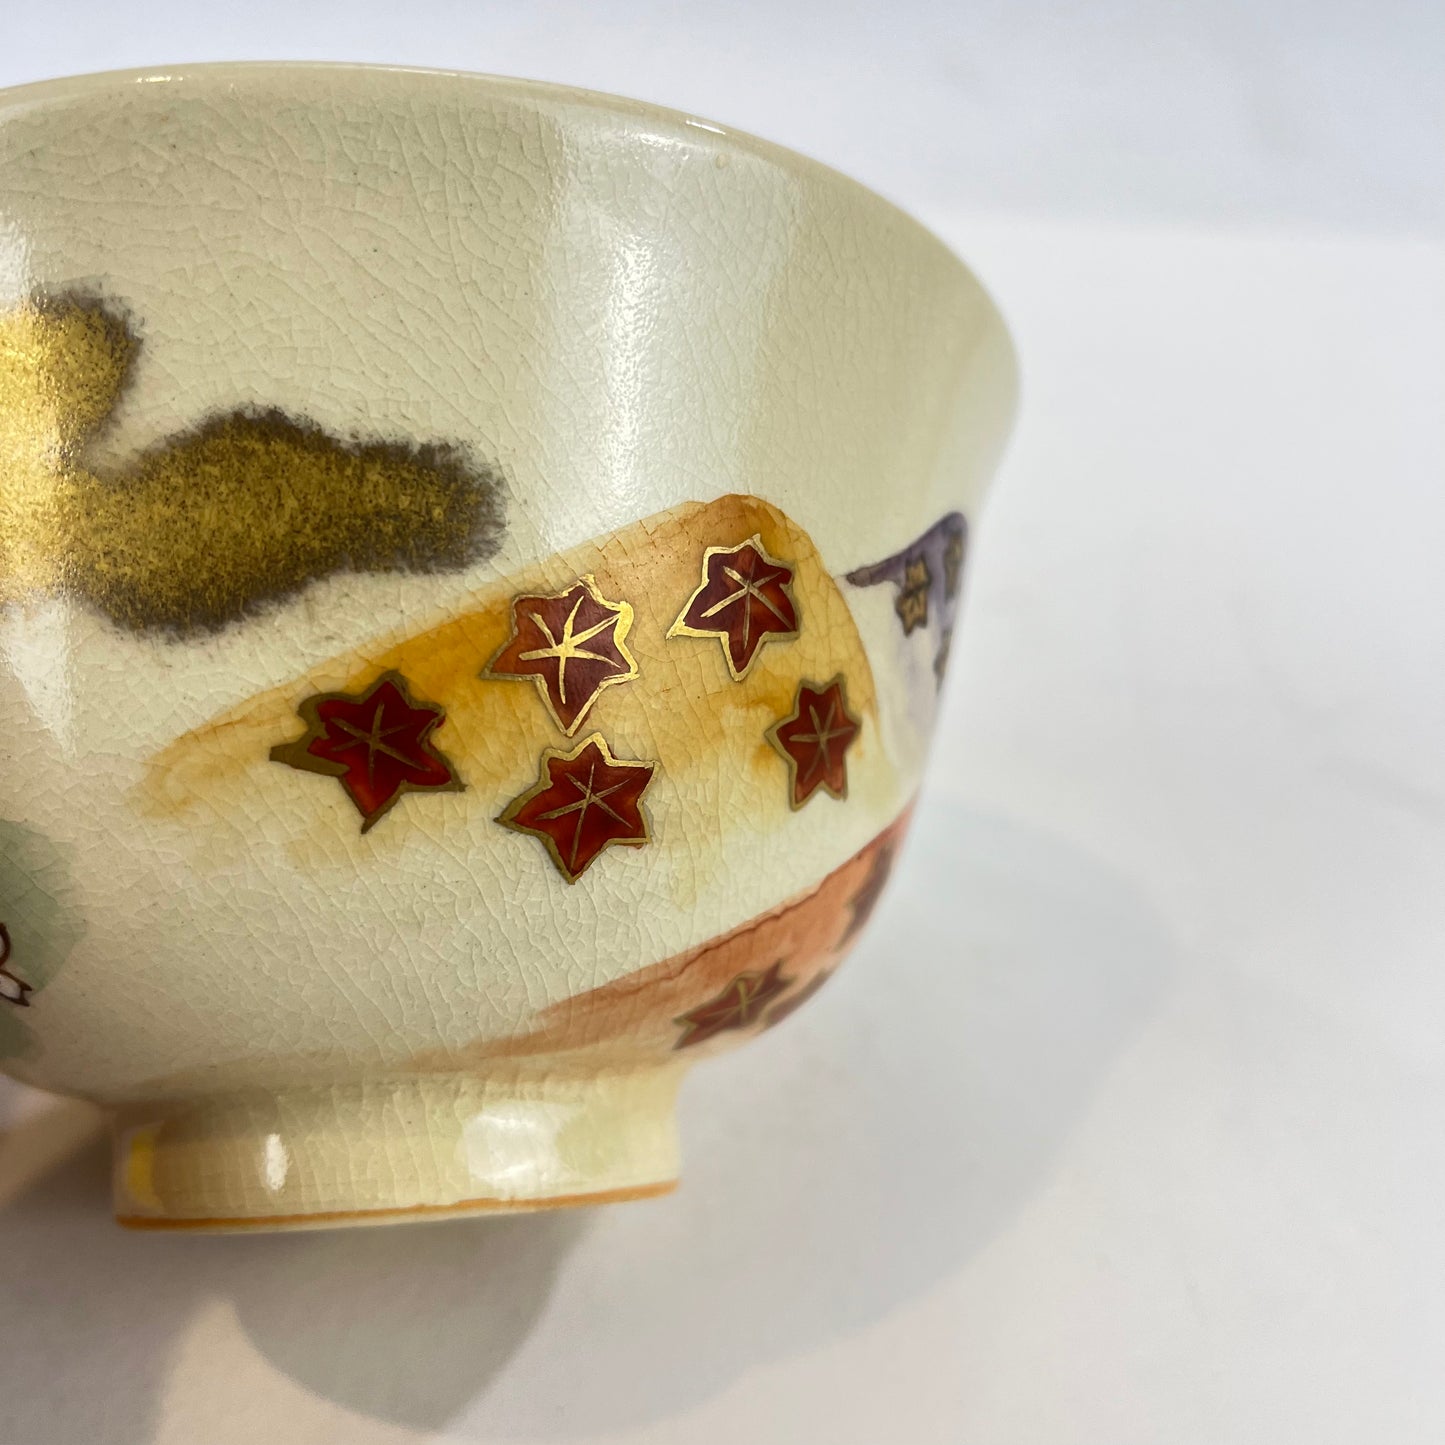 Signed Tea Ceremony Chawan Tea Bowl w/ Gold Clouds & Multicolored Hills